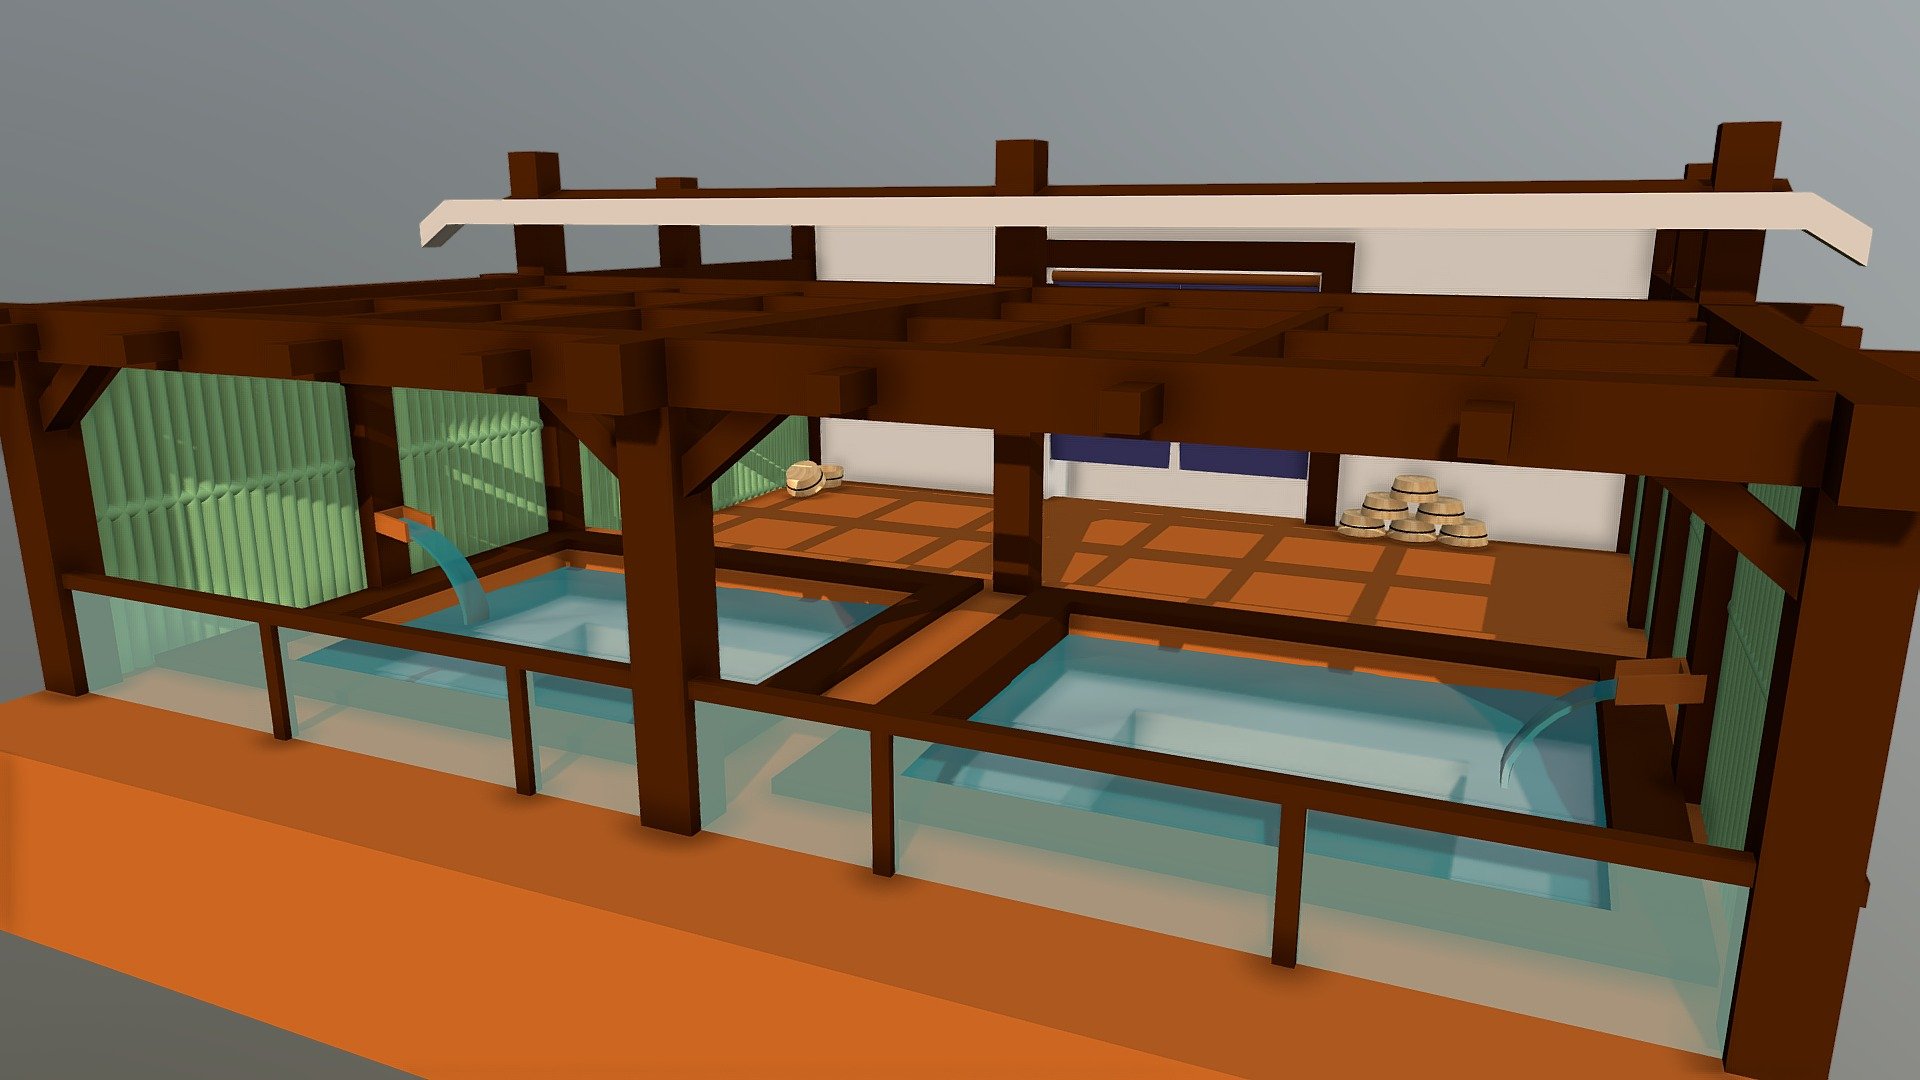 A Simple Japanese Onsen

Relaxing your body in a outdoor Onsen

Base on anime and real life onsen. Created with Maya 3d model